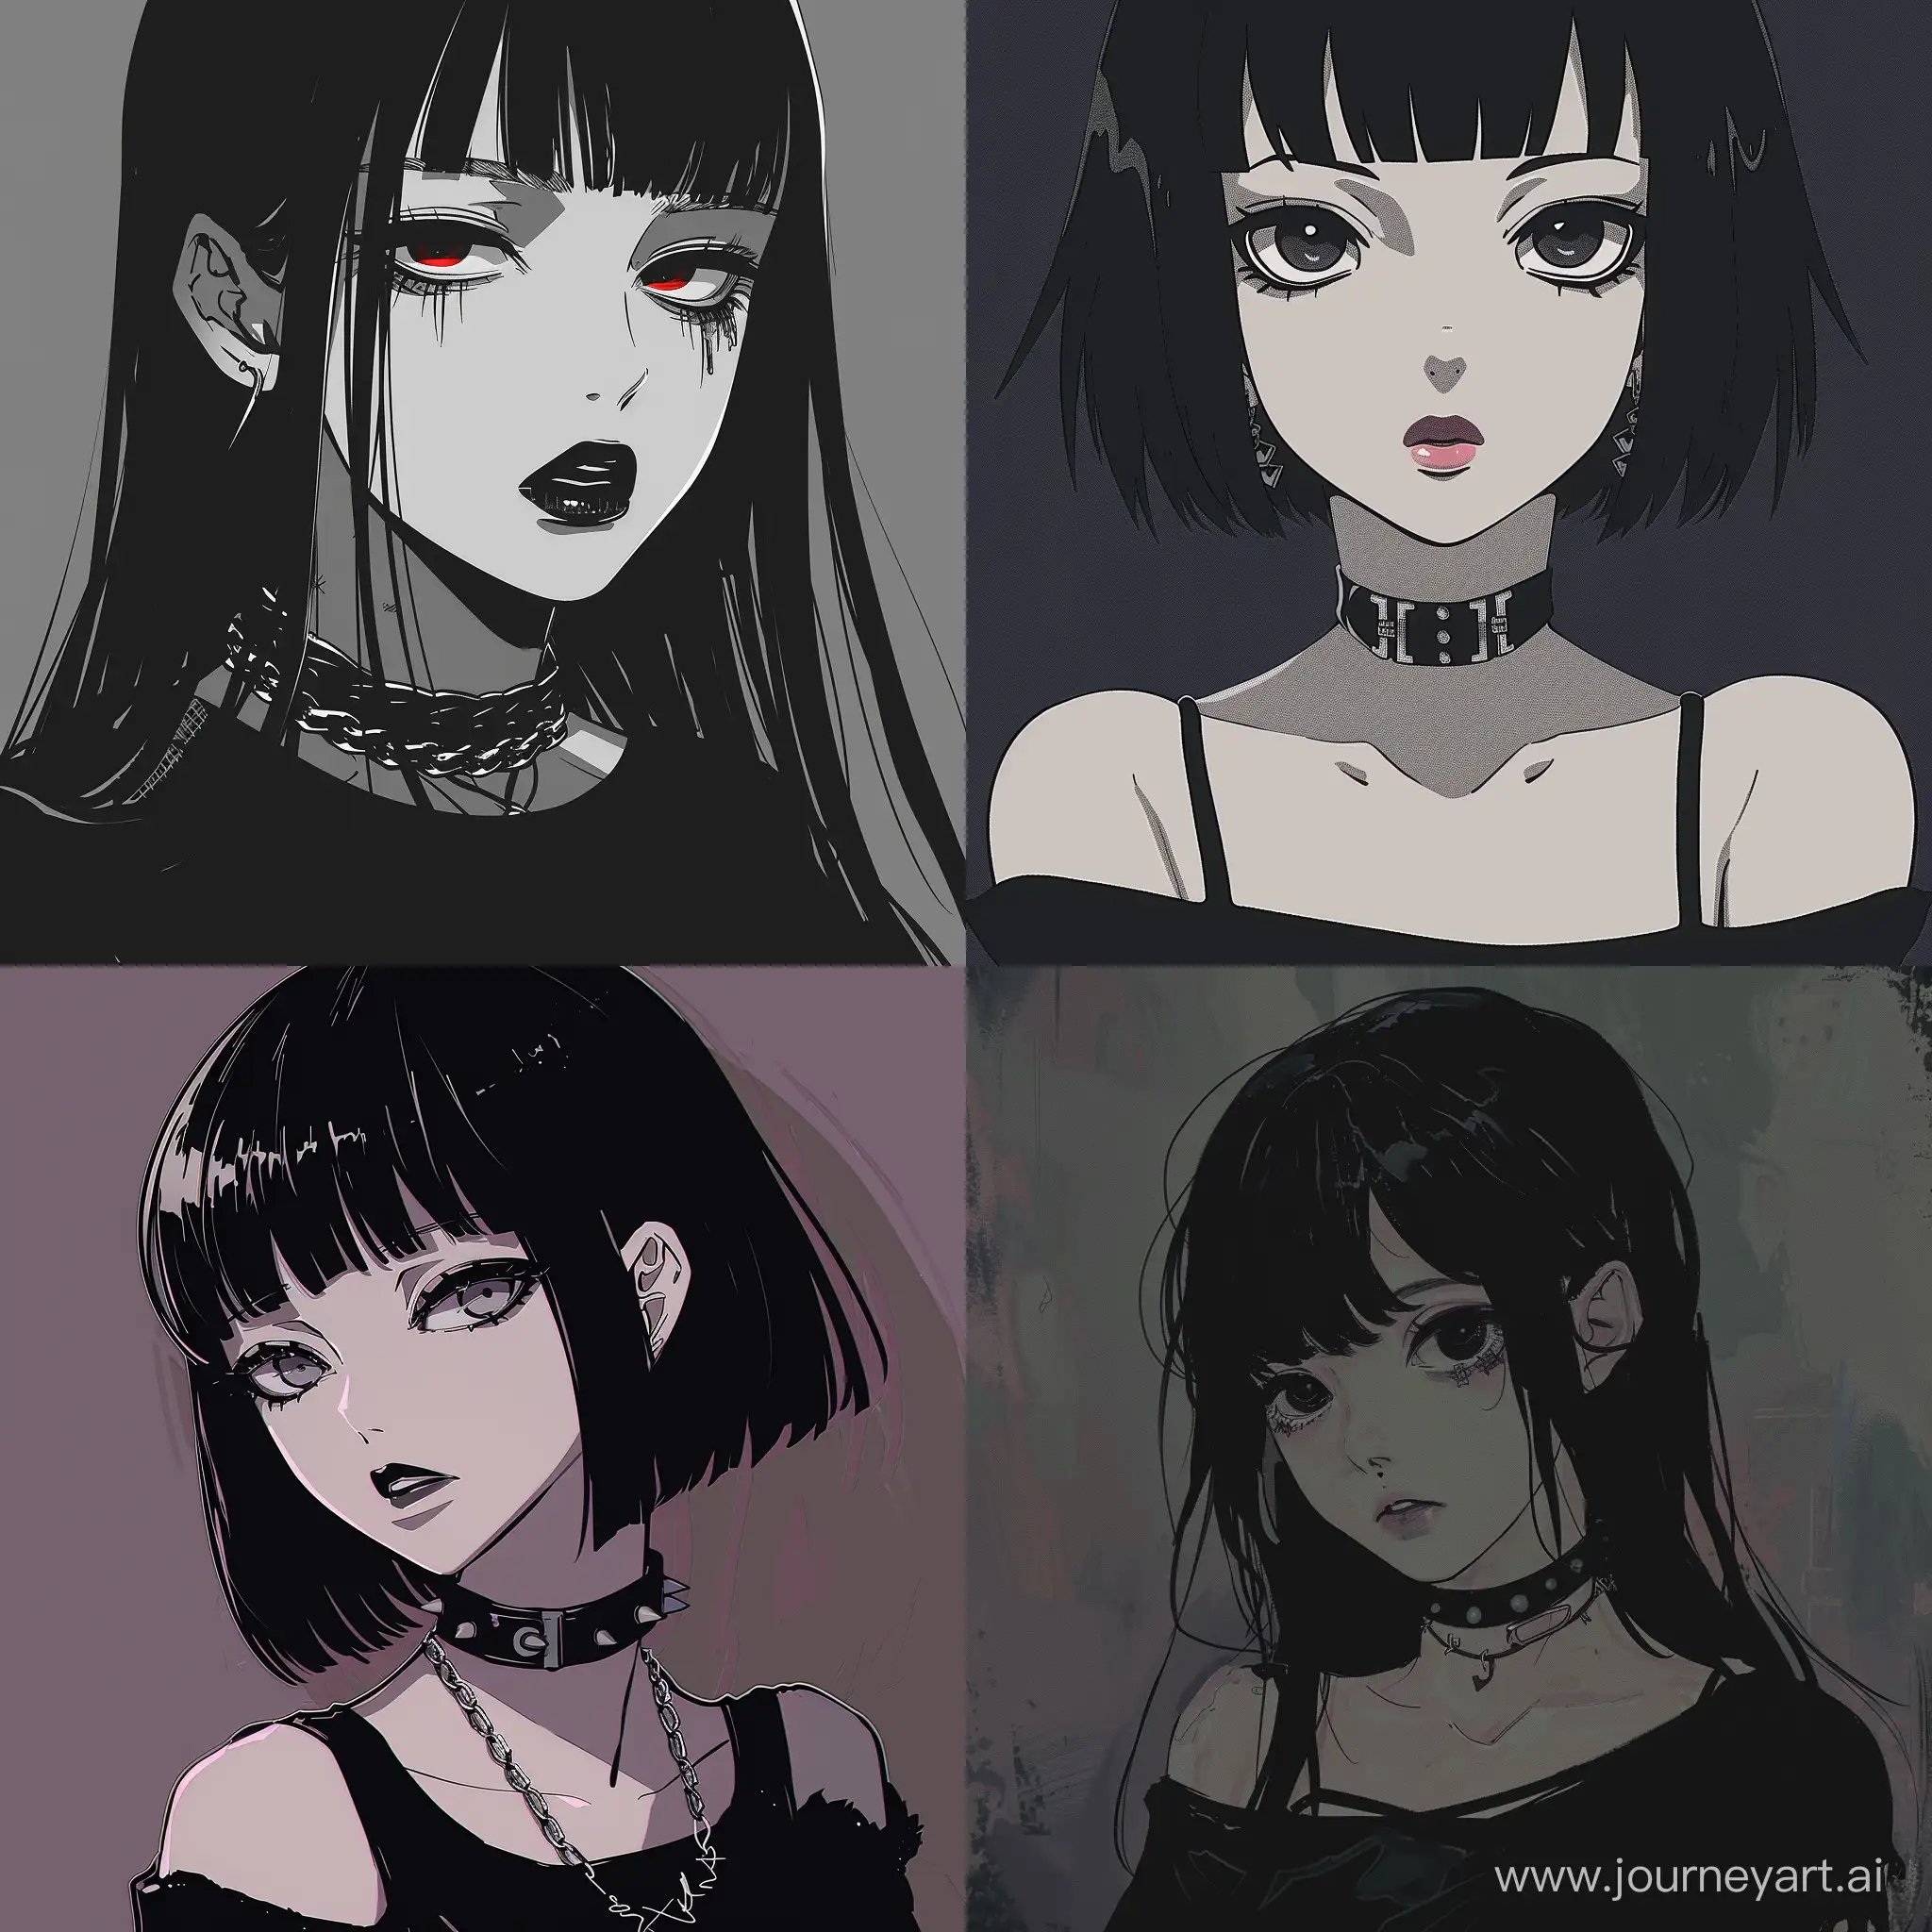 Anime goth girl with kare, choker on neck 